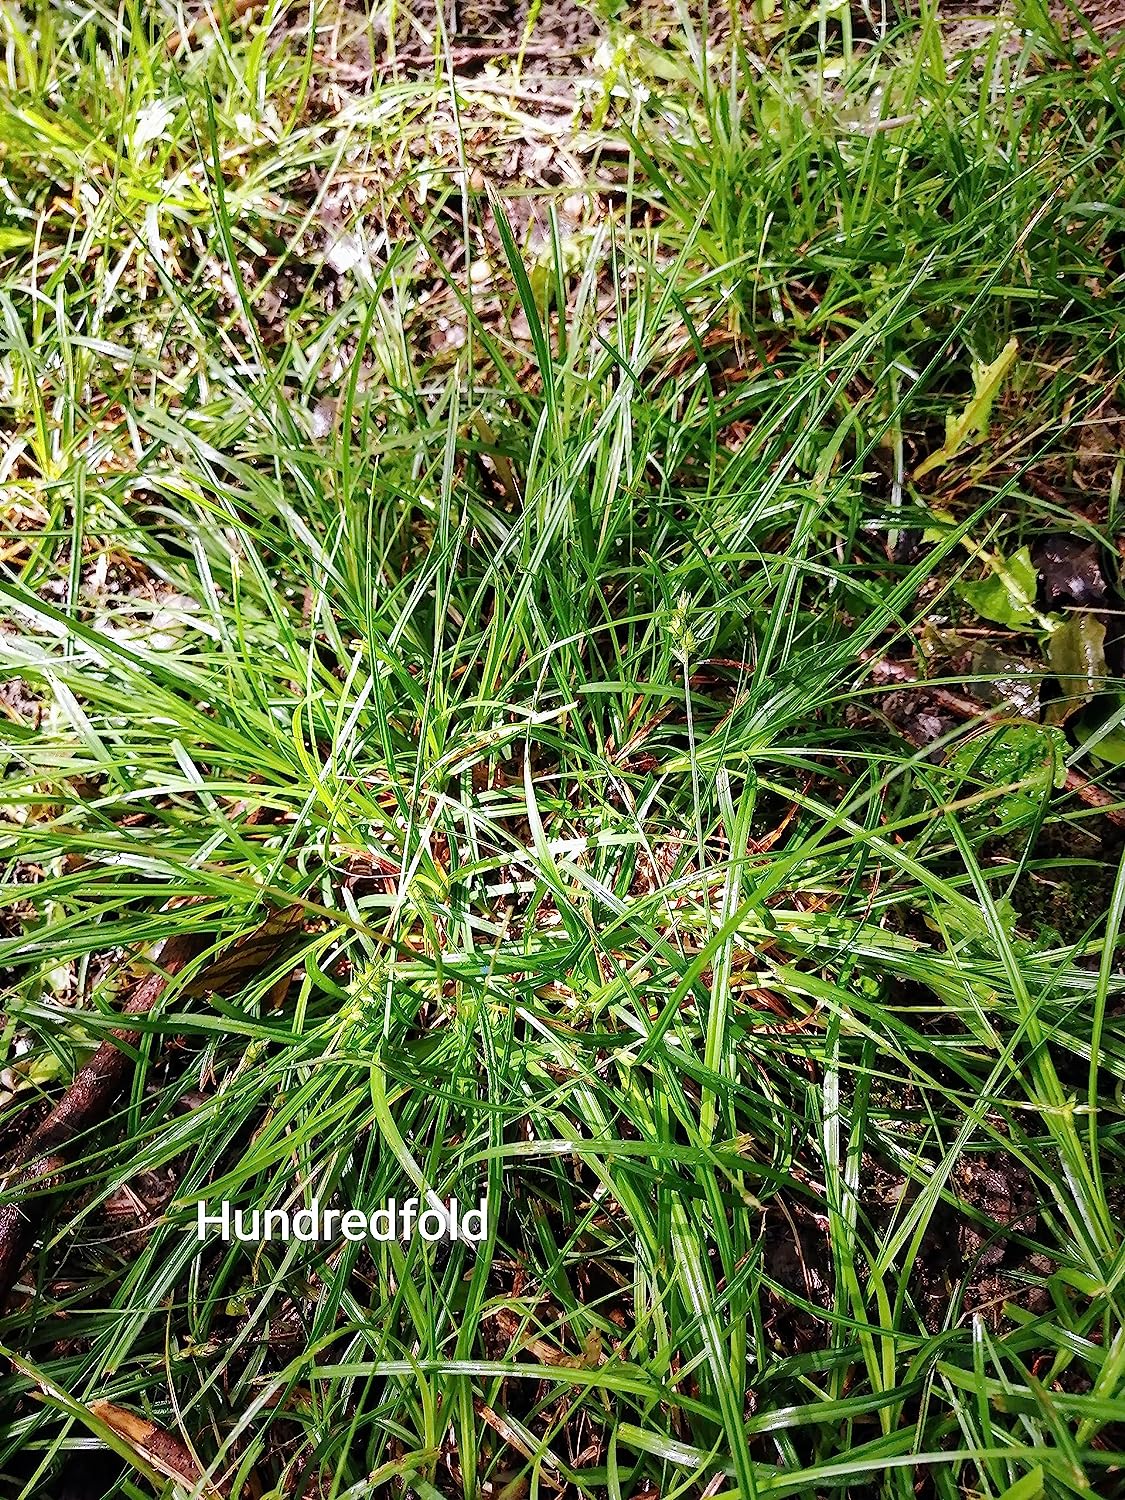 Hundredfold Common Wood Sedge Live Plants in a Small Container - Carex Blanda Creek Sedge Ontario Native Grass, Lawn Alternative and Ground Cover for Shade Areas, Indoor House Plant